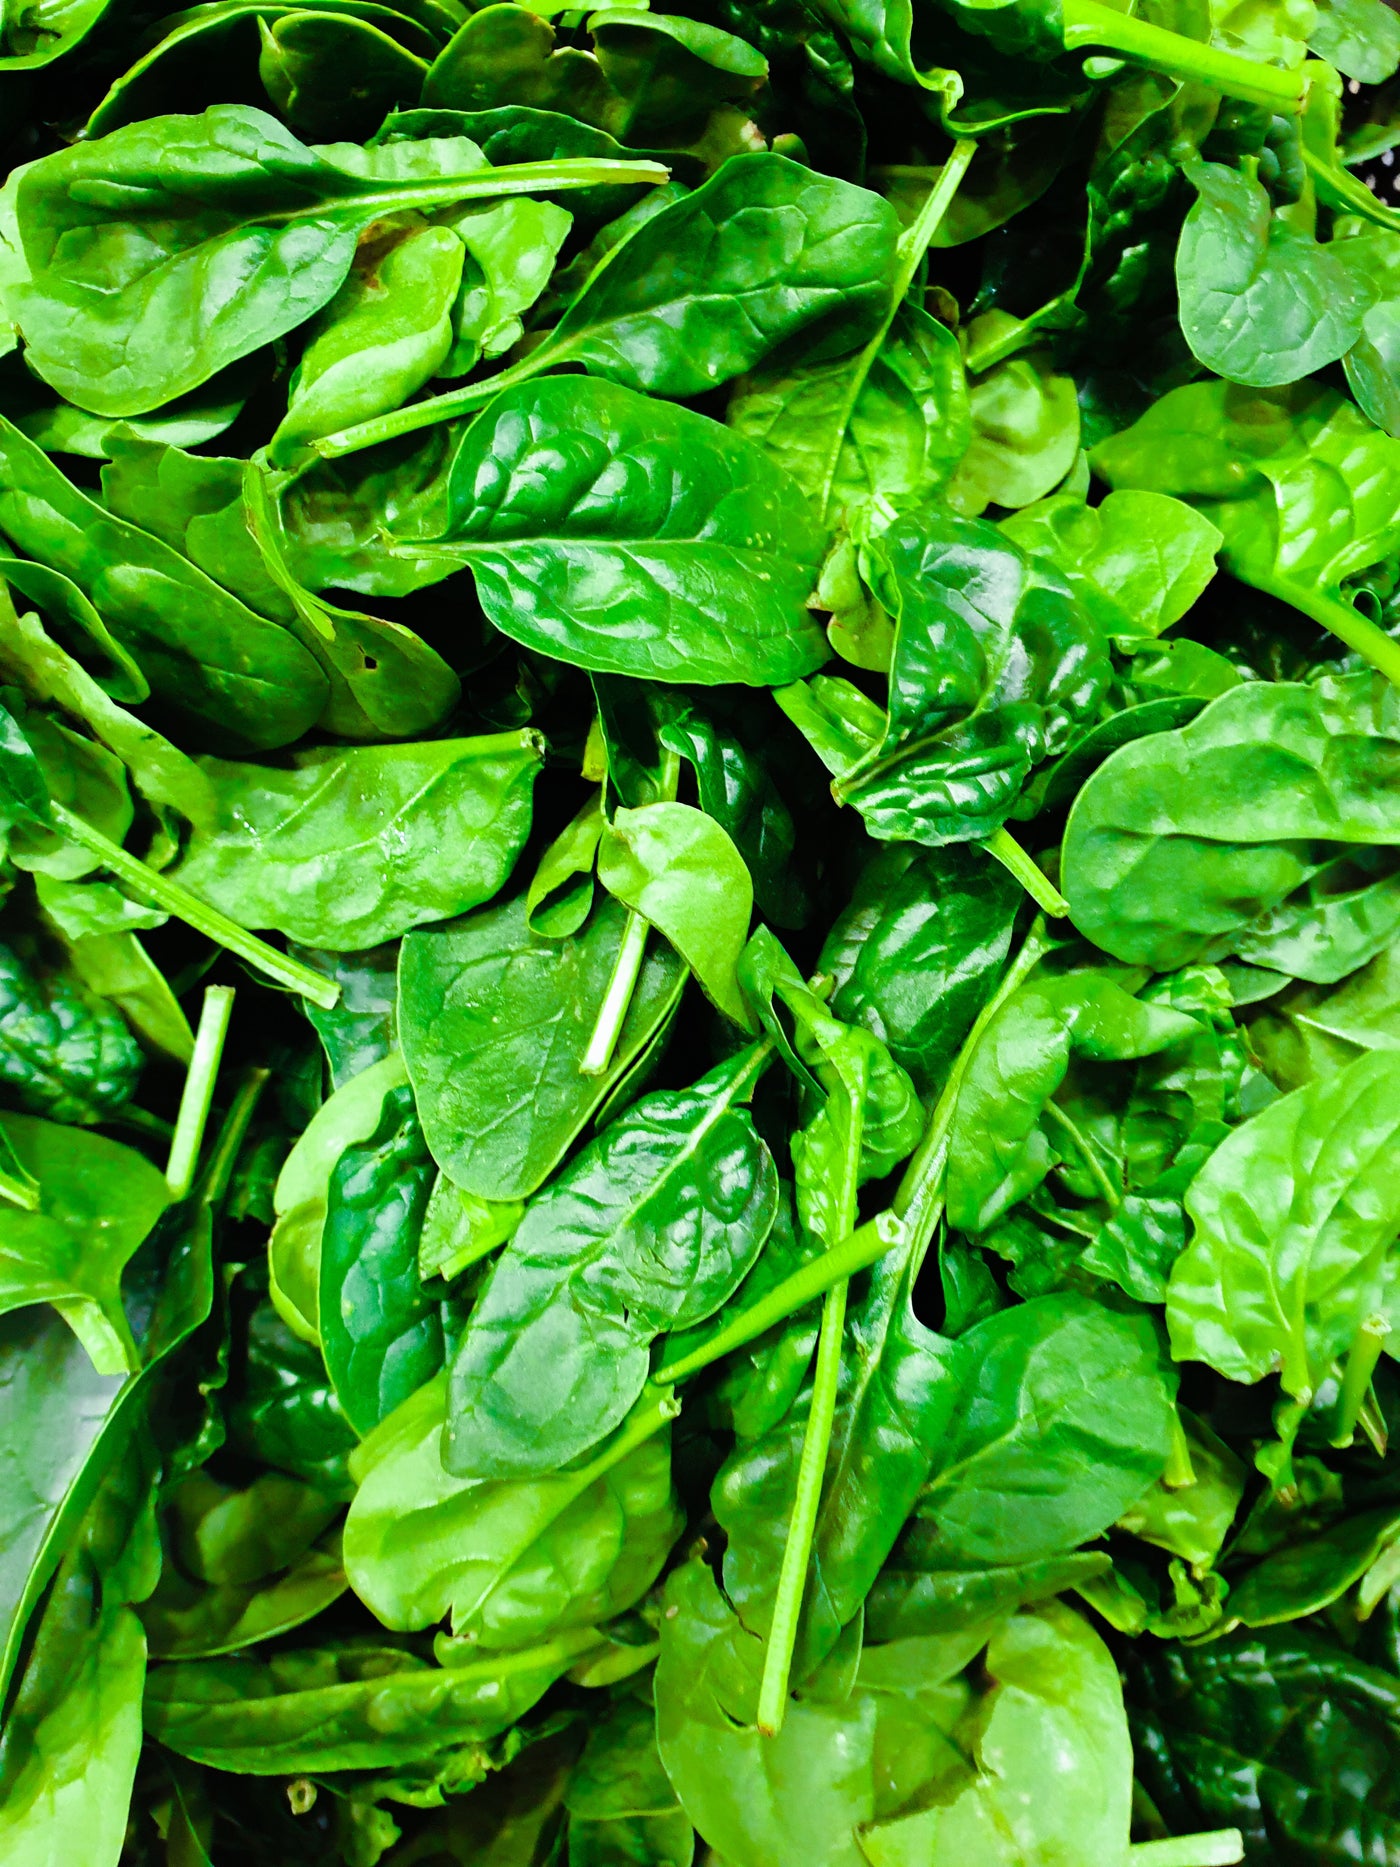 How to Harvest Spinach to Keep it Growing Longer